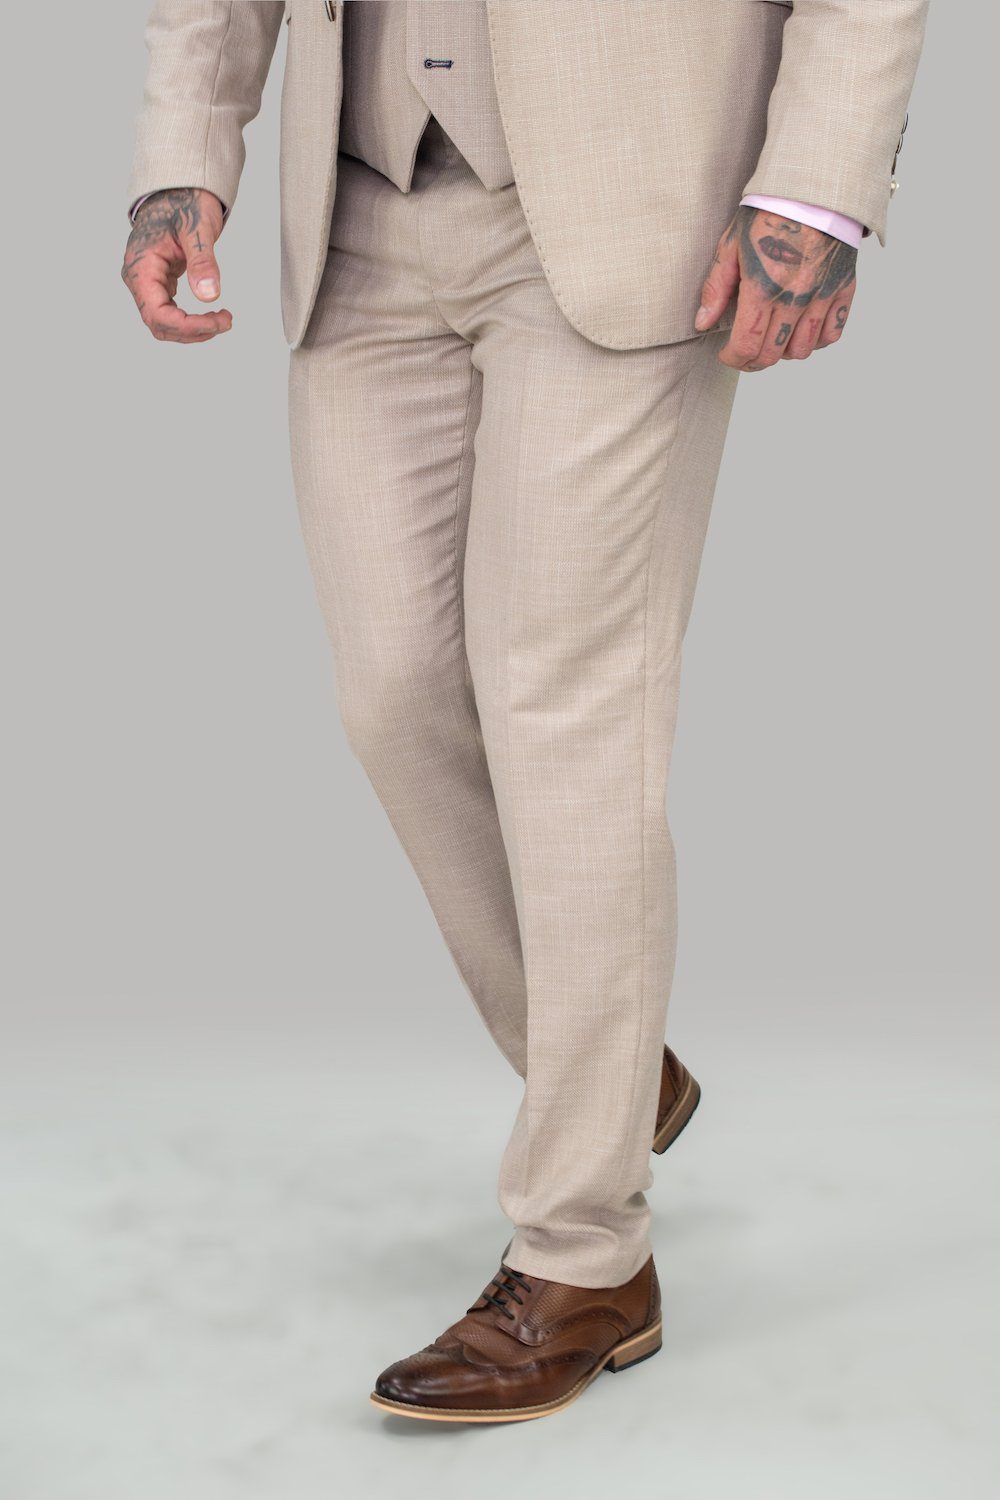 Textured Beige Trousers - STOCK CLEARANCE